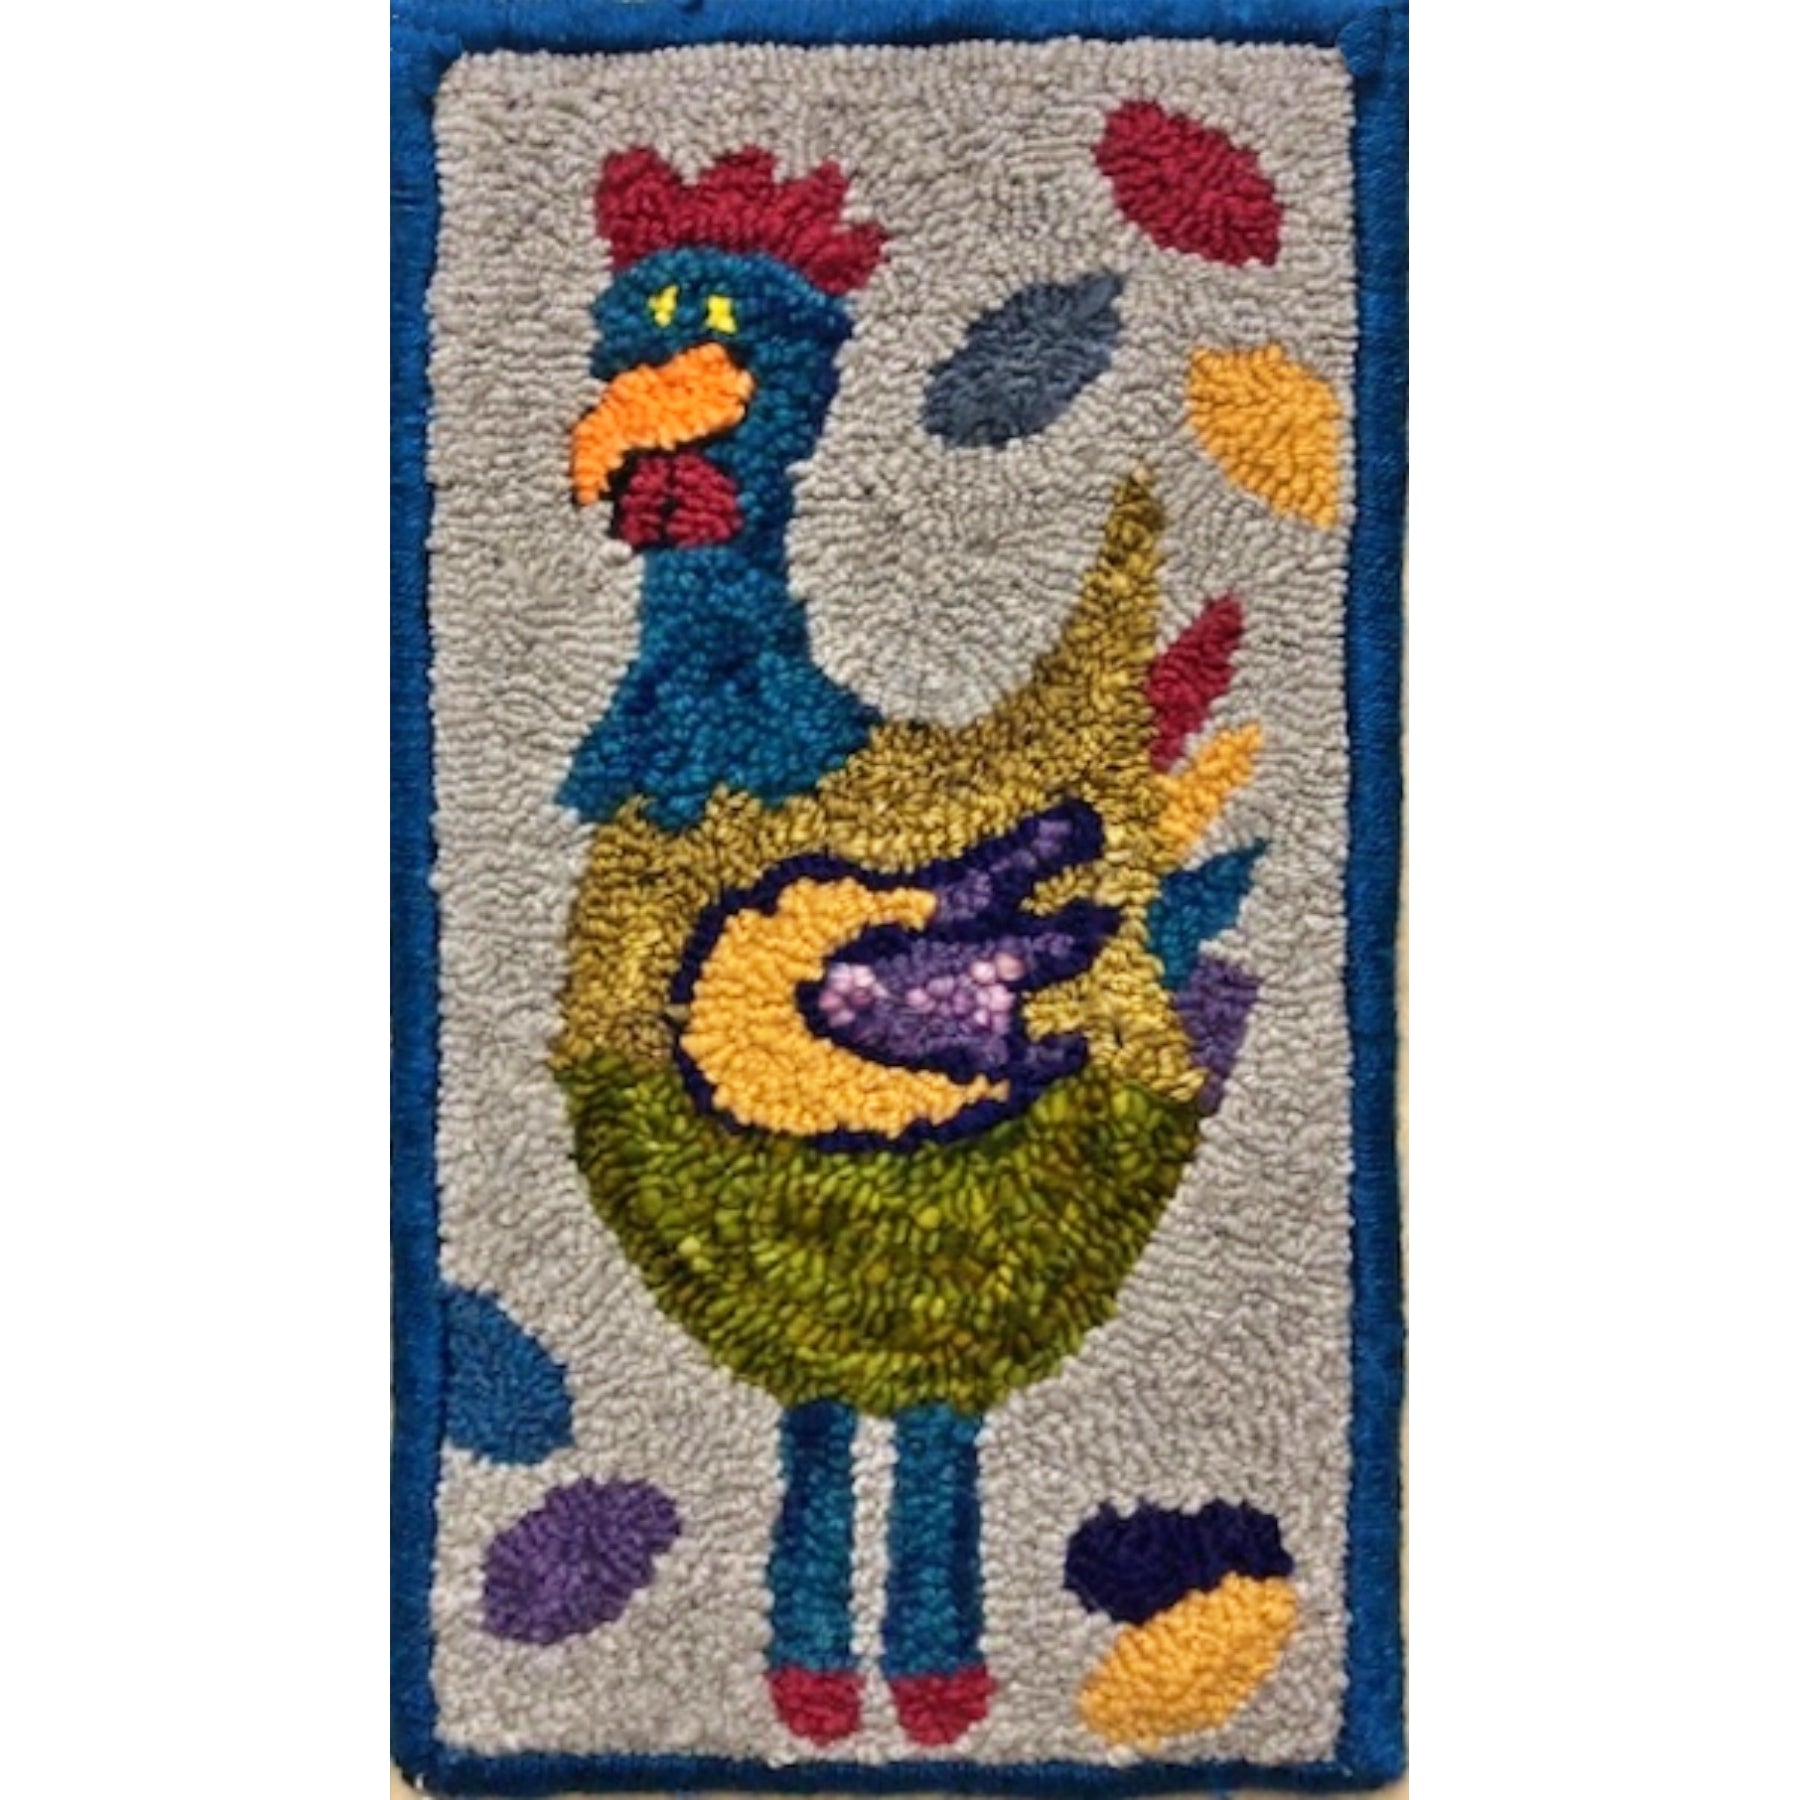 Cluck, rug hooked by Jean Sherwood